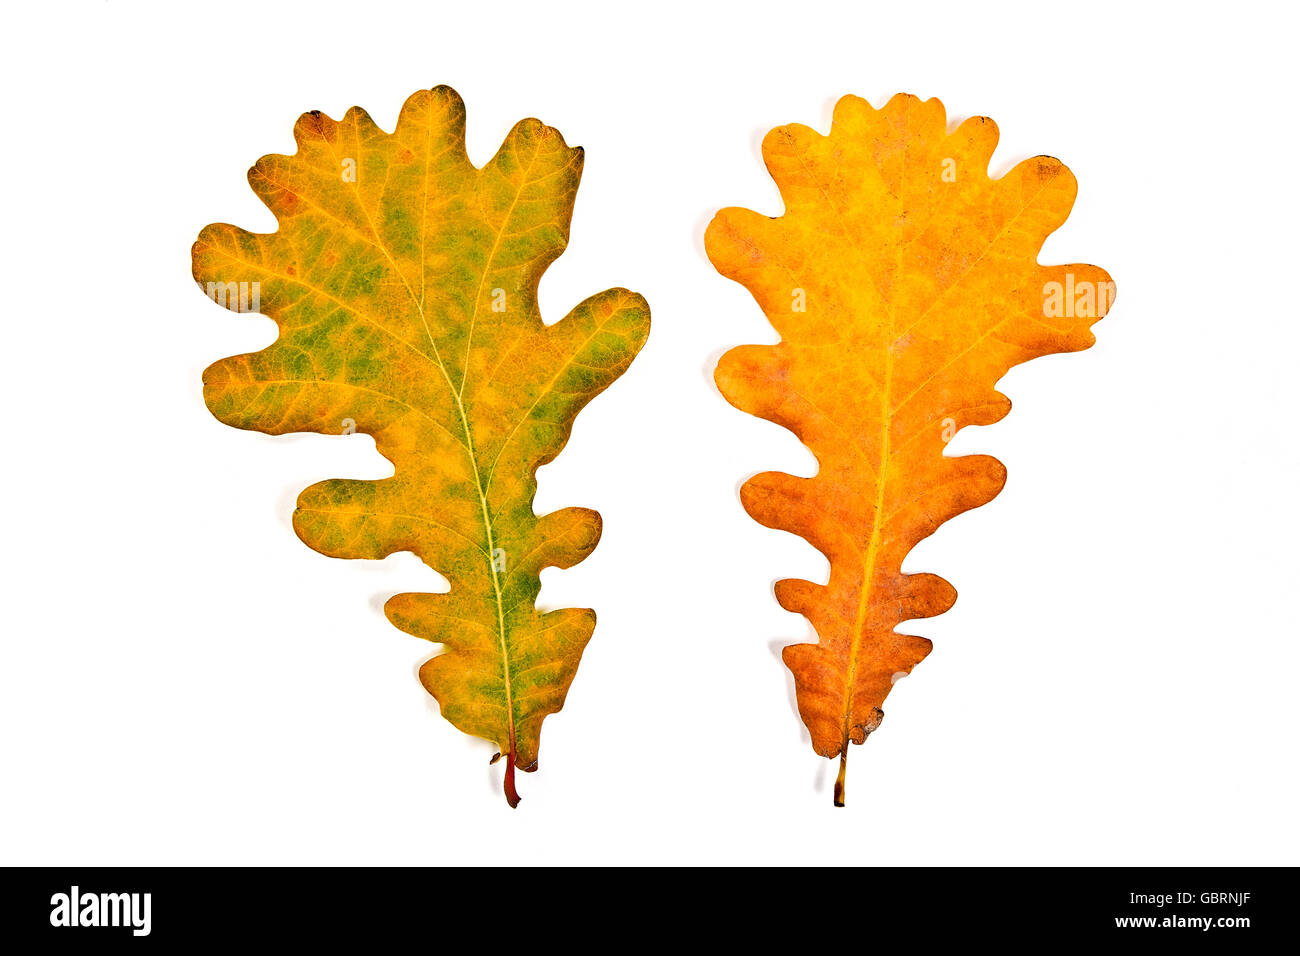 Autumn leaves of oak tree isolated on white background. With clipping path. Autumn leaves of oak tree colored by yellow, red Stock Photo